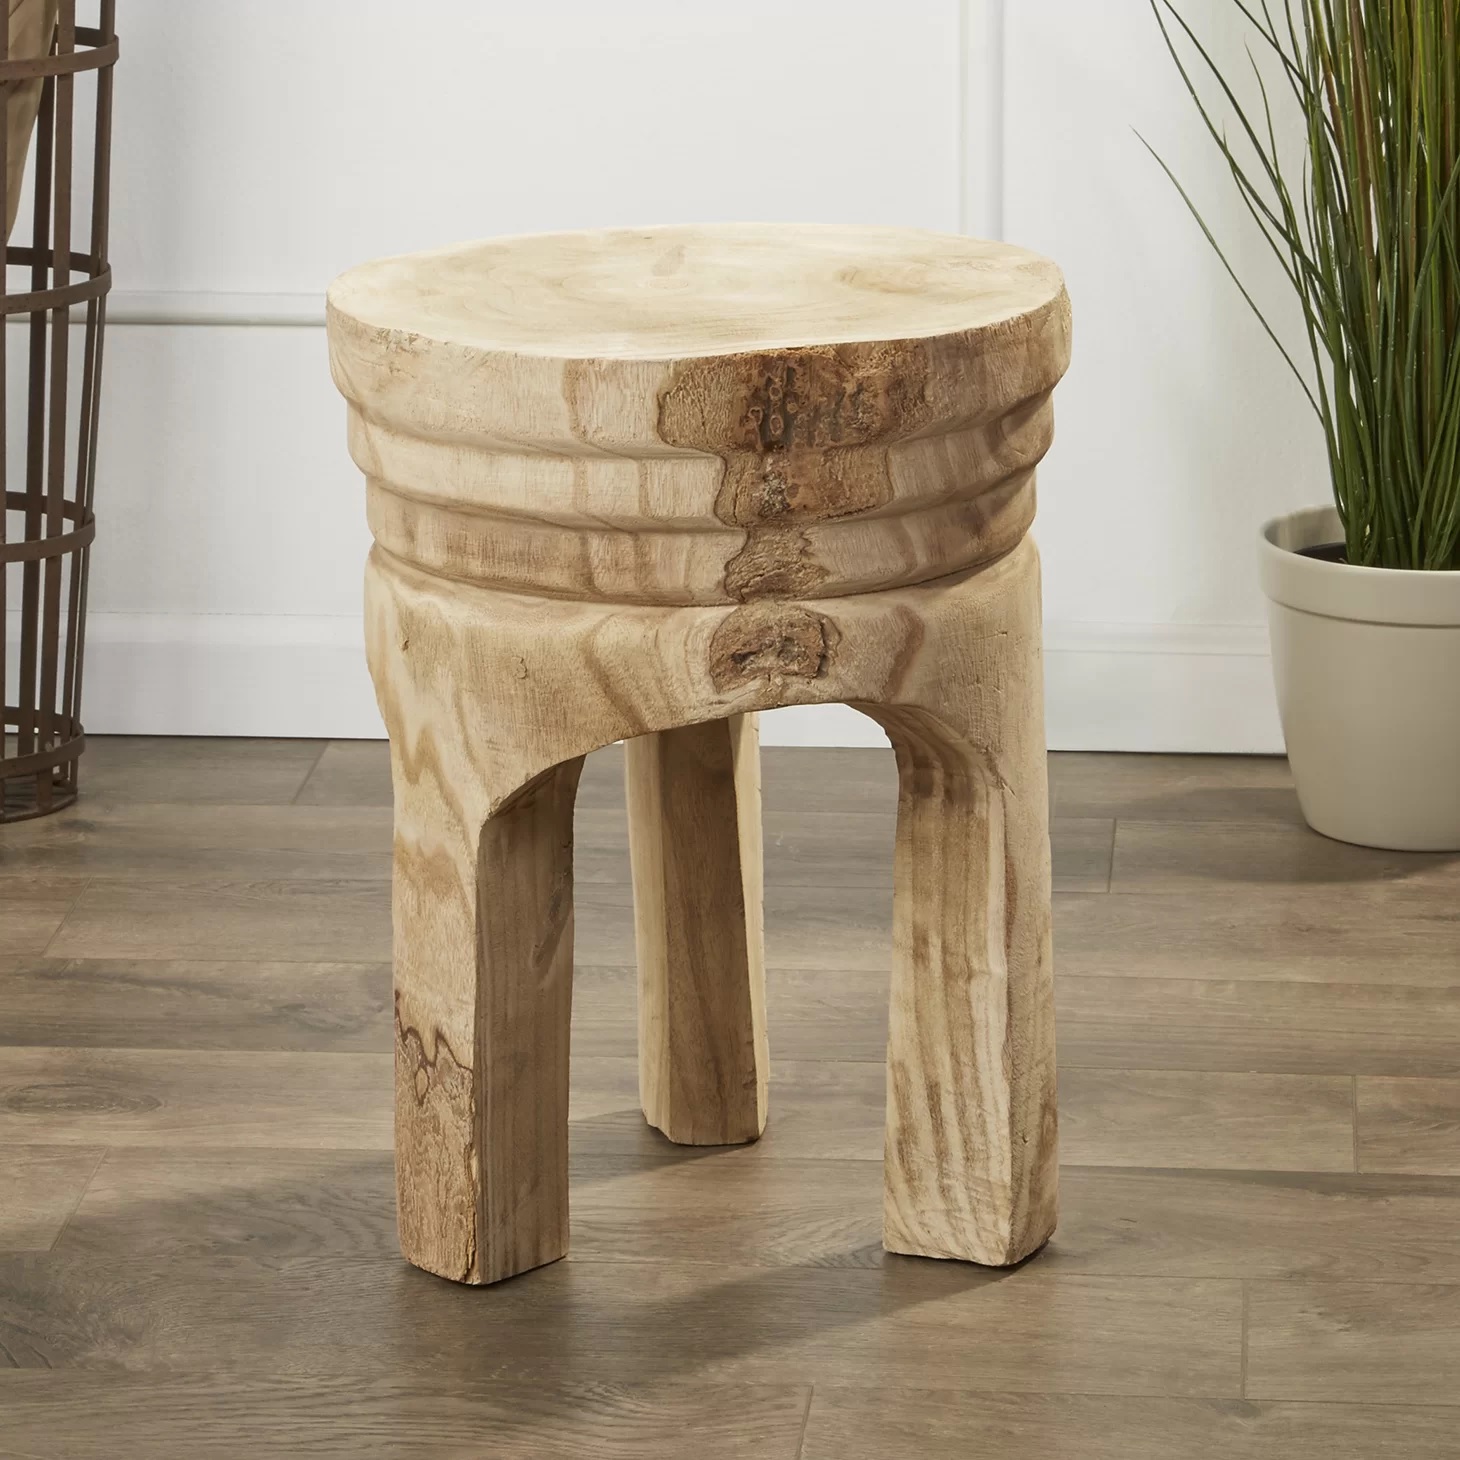 unique unfinished 3 legged wooden stool made from paulownia wood creative carved artistic side table multipurpose modern farmhouse accent furniture vanity stool plant stand